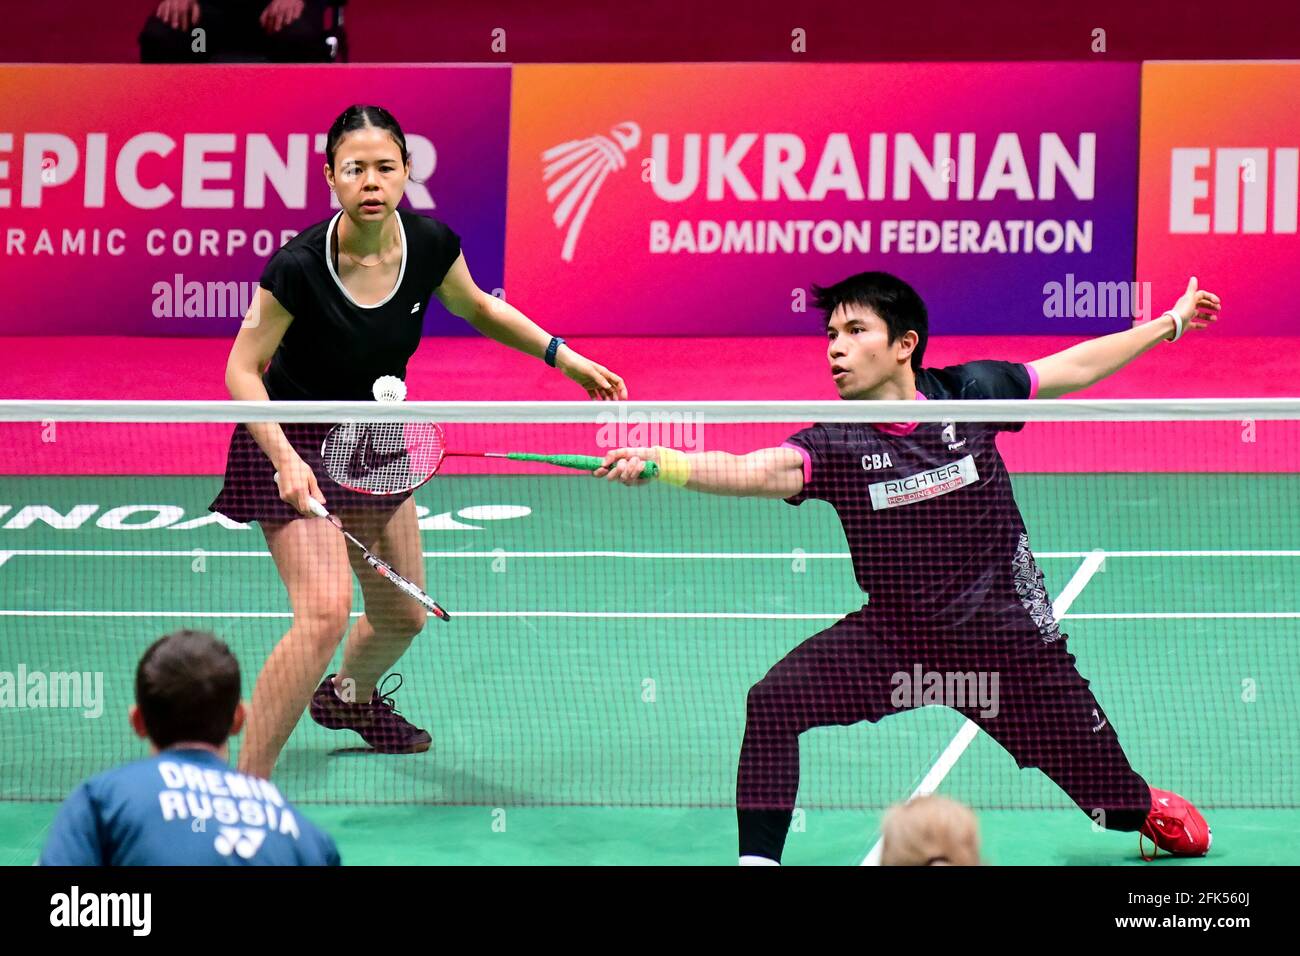 KYIV, UKRAINE - APRIL 28: Jones Ralfy Jansen of Germany in action in his  Mixed Doubles match with Kilasu Ostermeyer of Germany against Evgenij  Dremin of Russia and Evgenia Dimova of Russia